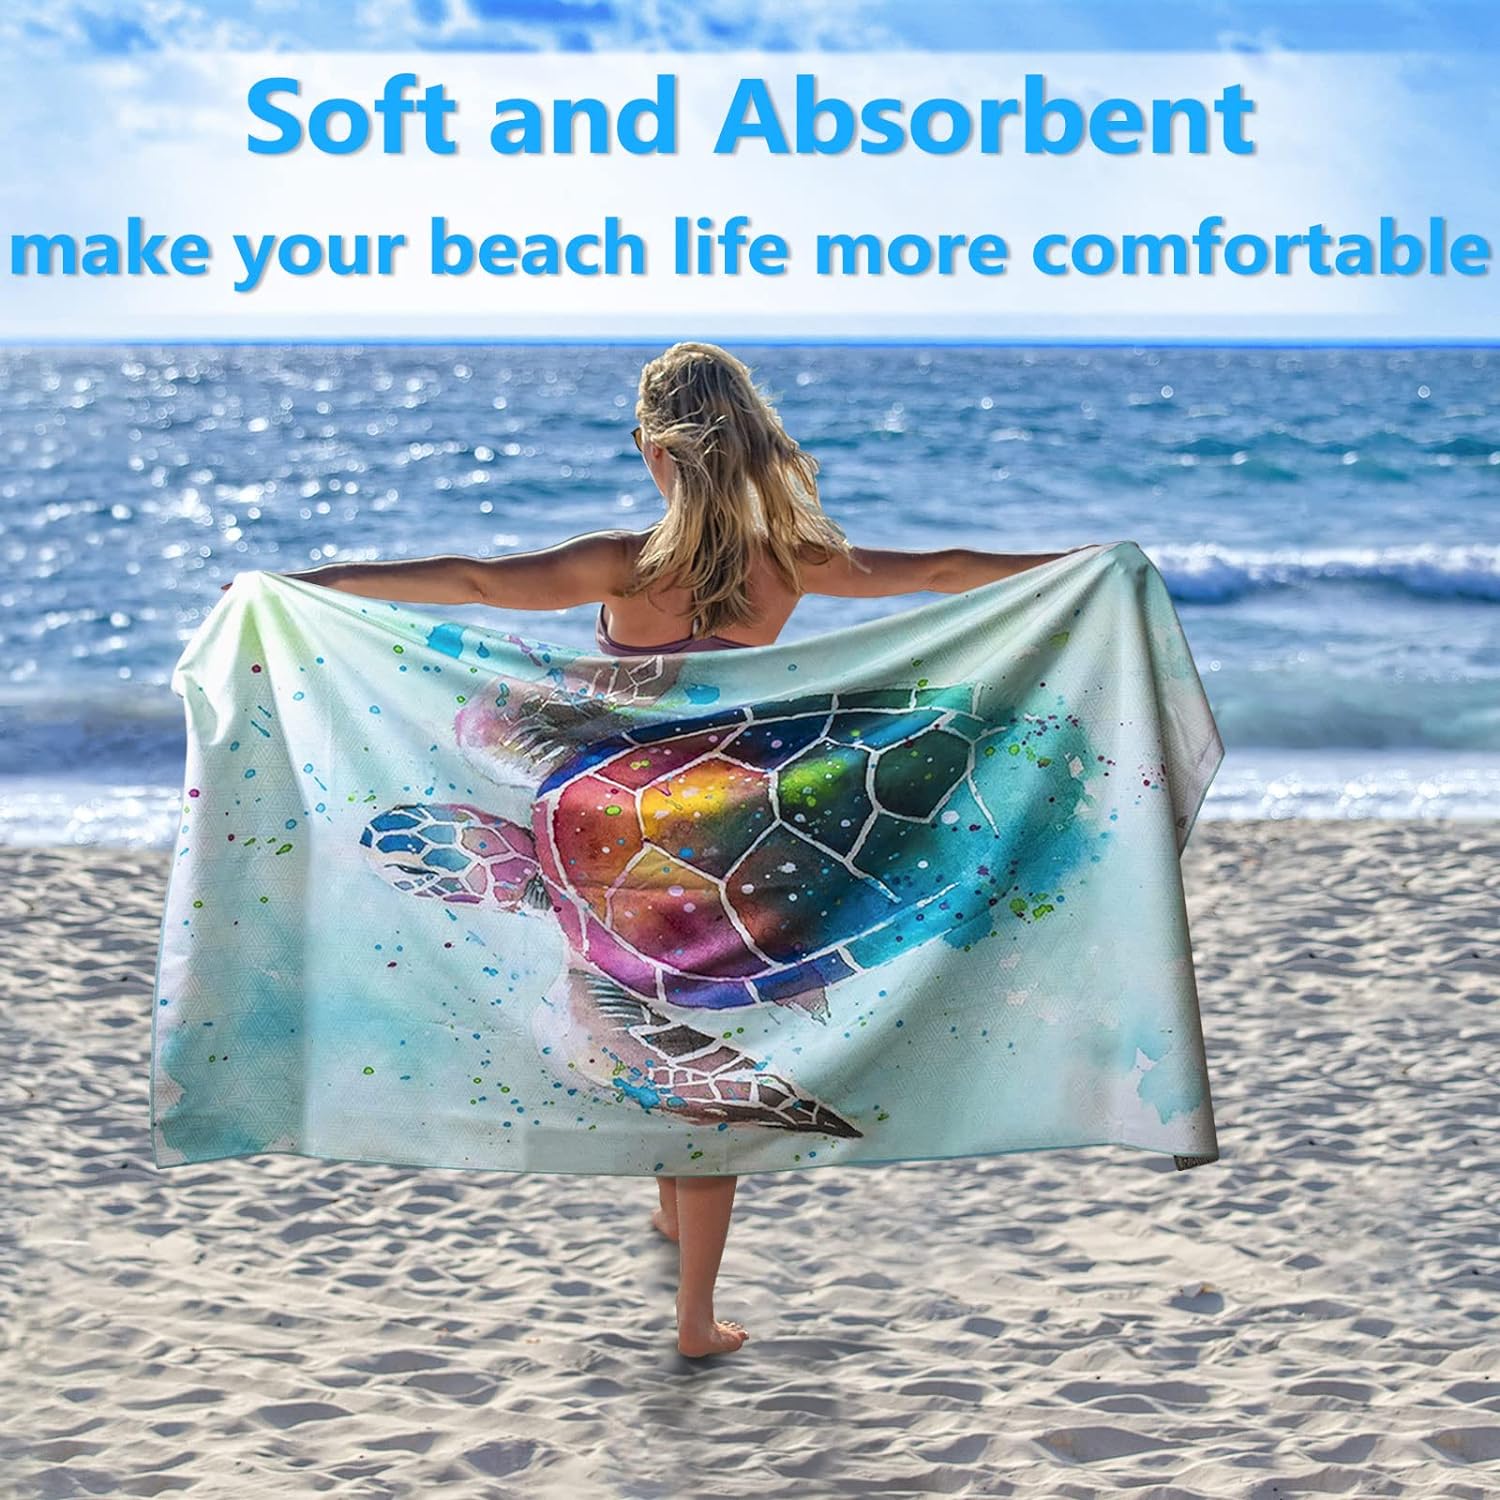 Microfiber Beach Towels 2 Packs, Oversized Quick Super Absorbent Towels for Adults, (72 x 36) Lightweight Thin Towels for Swimming Beach Camping